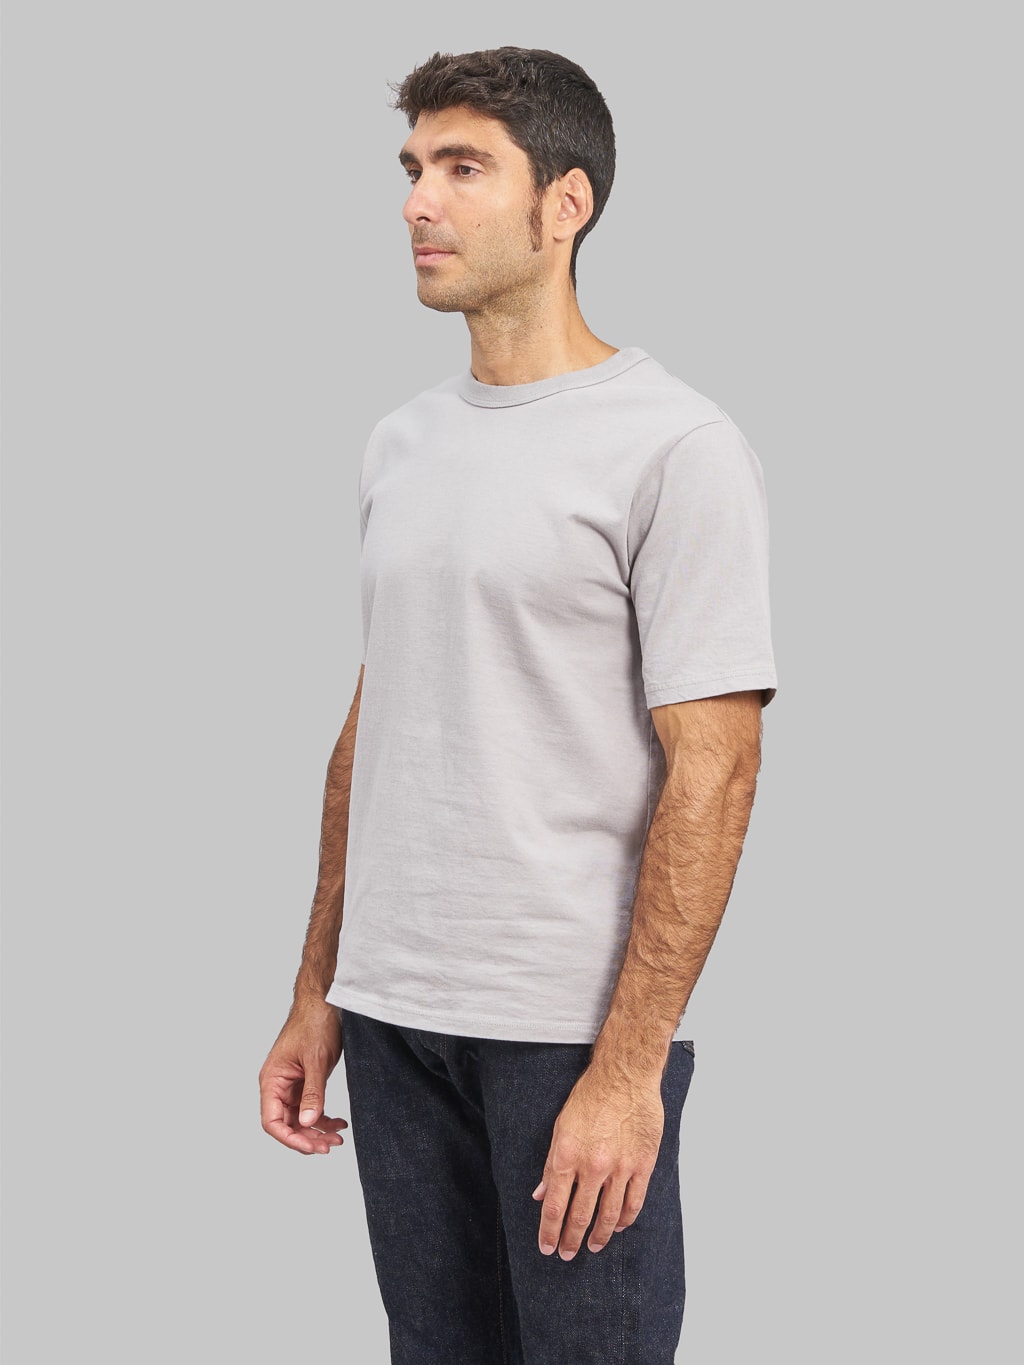 Jackman Lead Off TShirt grey midweight side fit